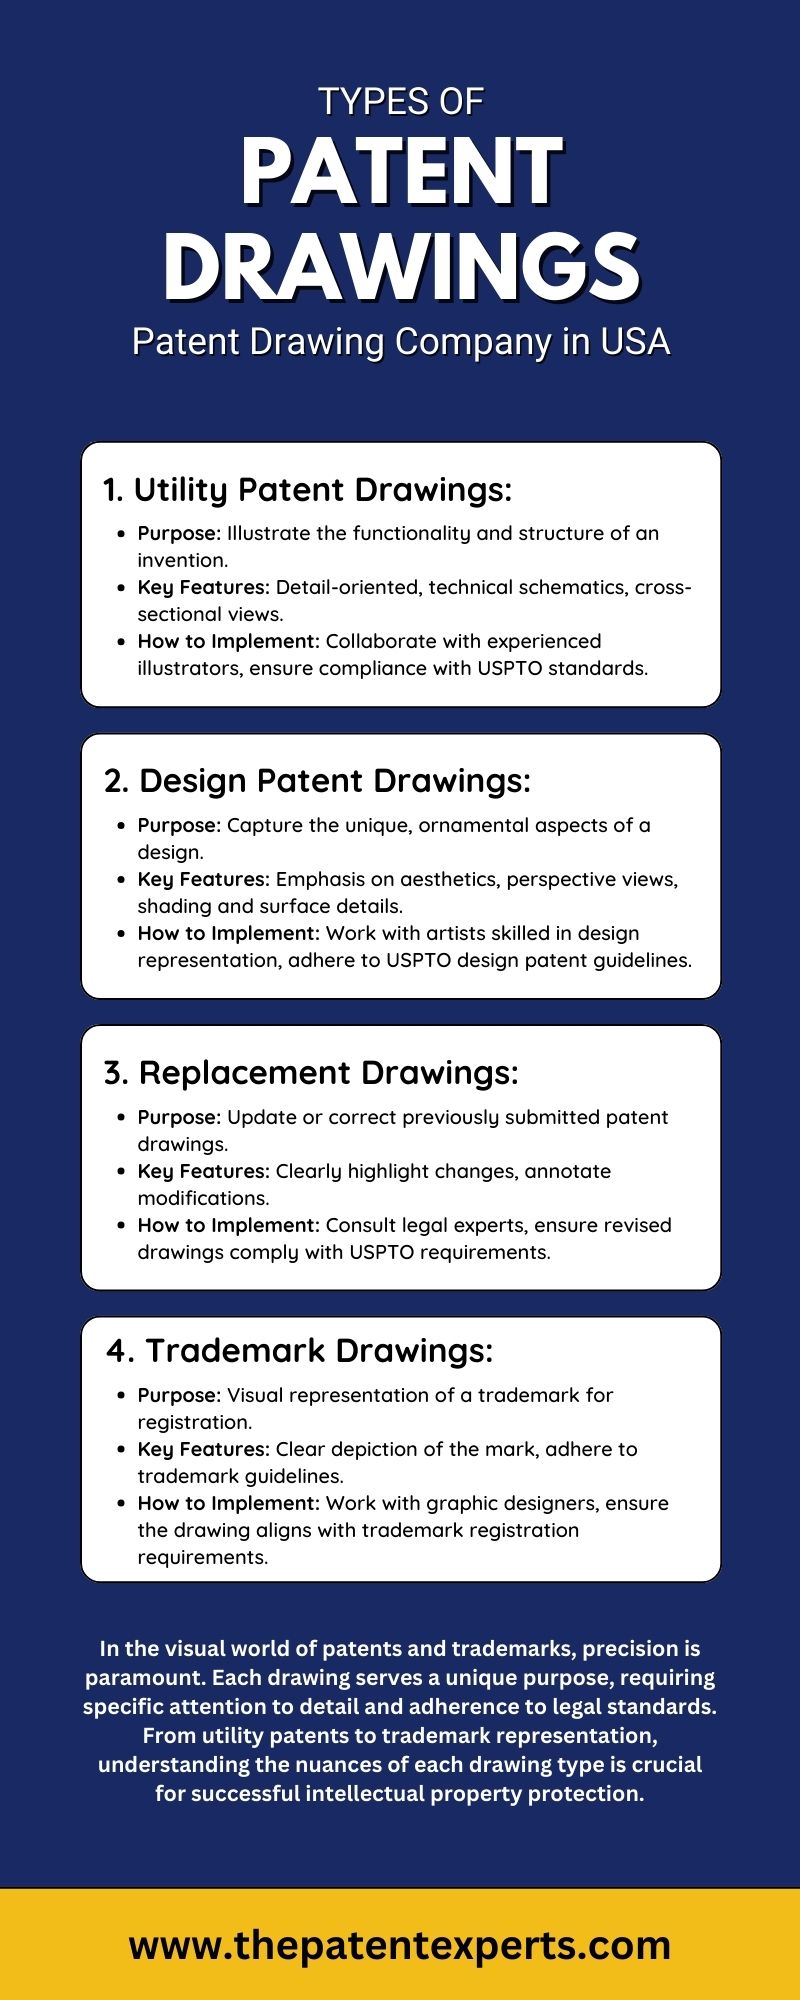 Leading Patent Drawing Company in the USA | The Patent Experts